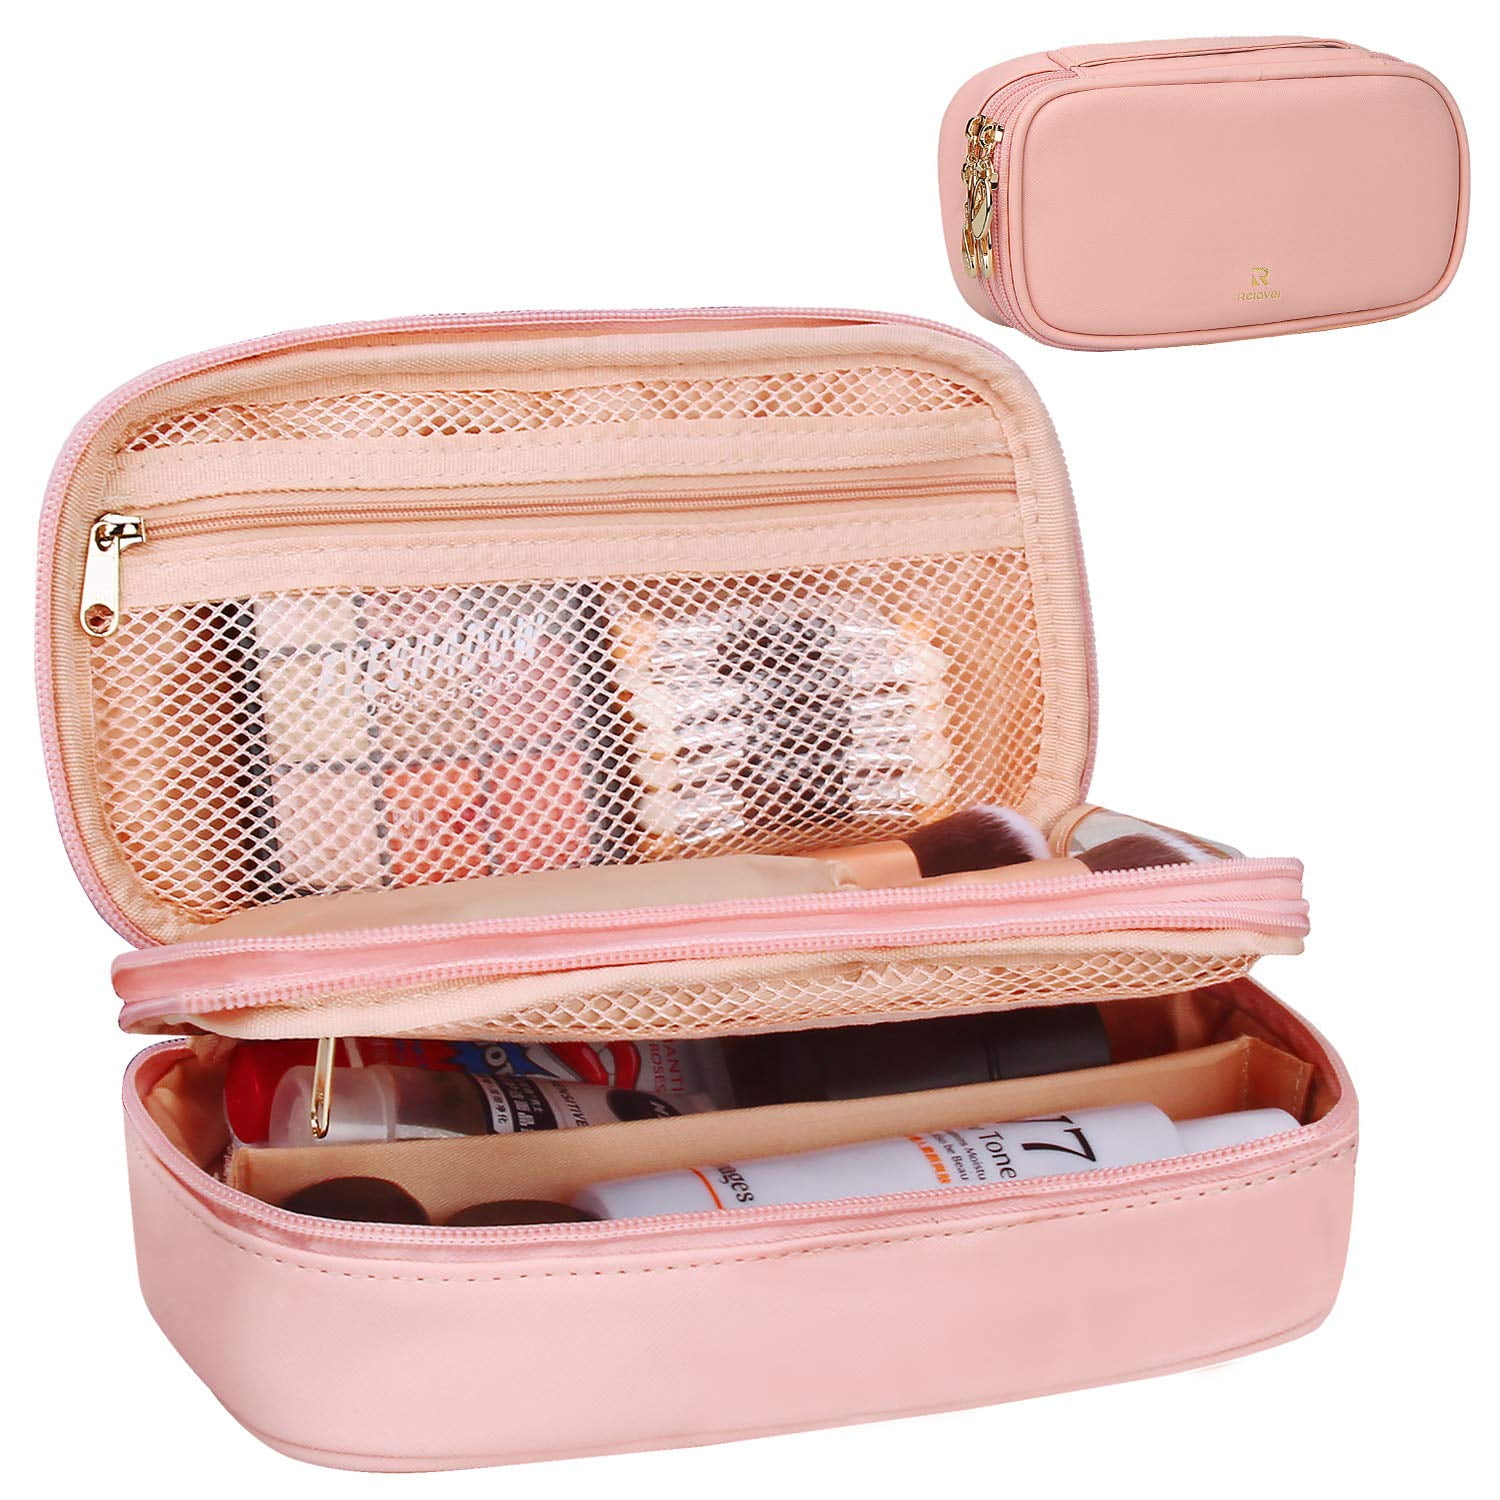 Adson Cosmetic Bag Girls, Travel Makeup Bag with Brush Compartment,  Portable Double Layer Waterproof Makeup Bag Organiser Toiletry Bag, Carry  Handle